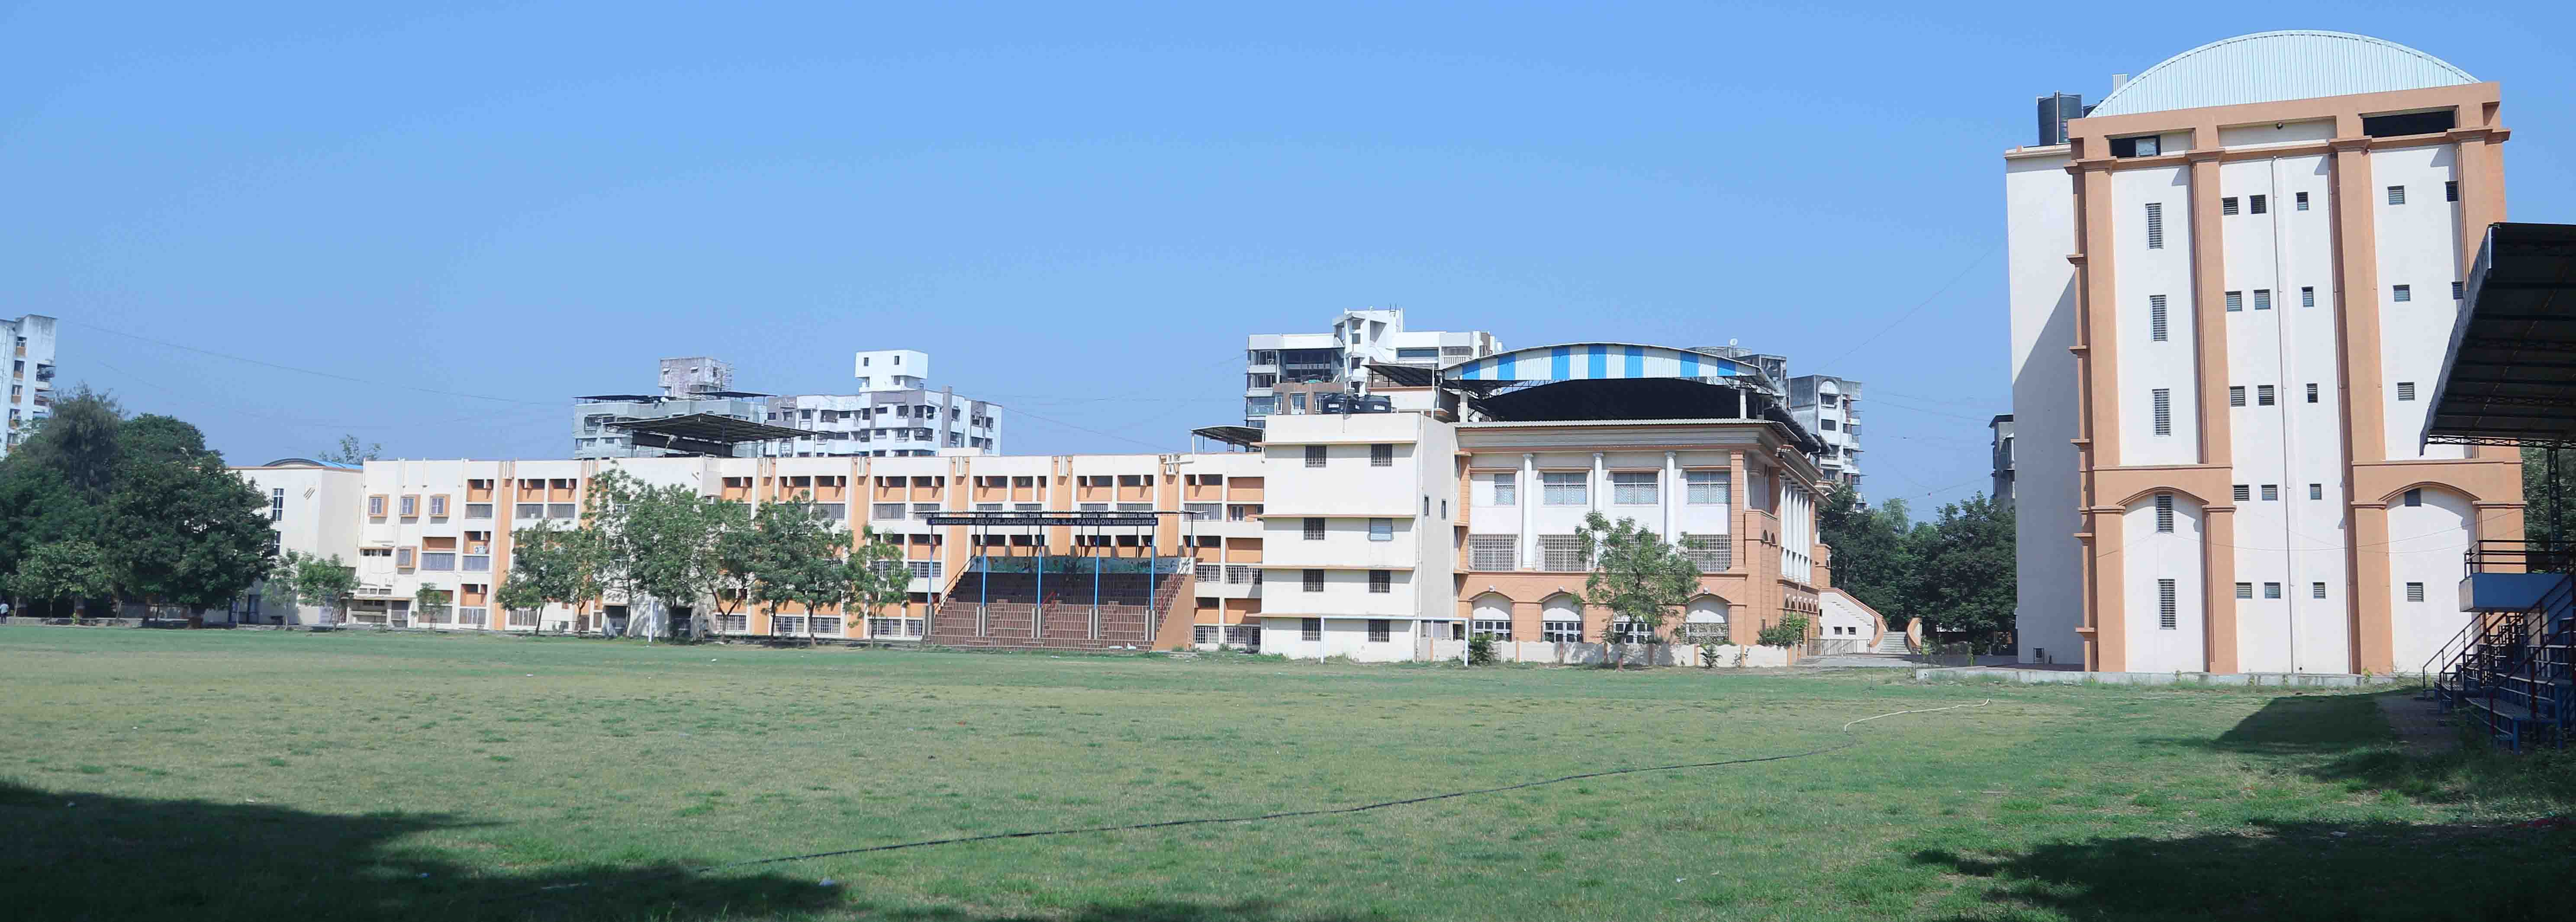 School Building and Ground